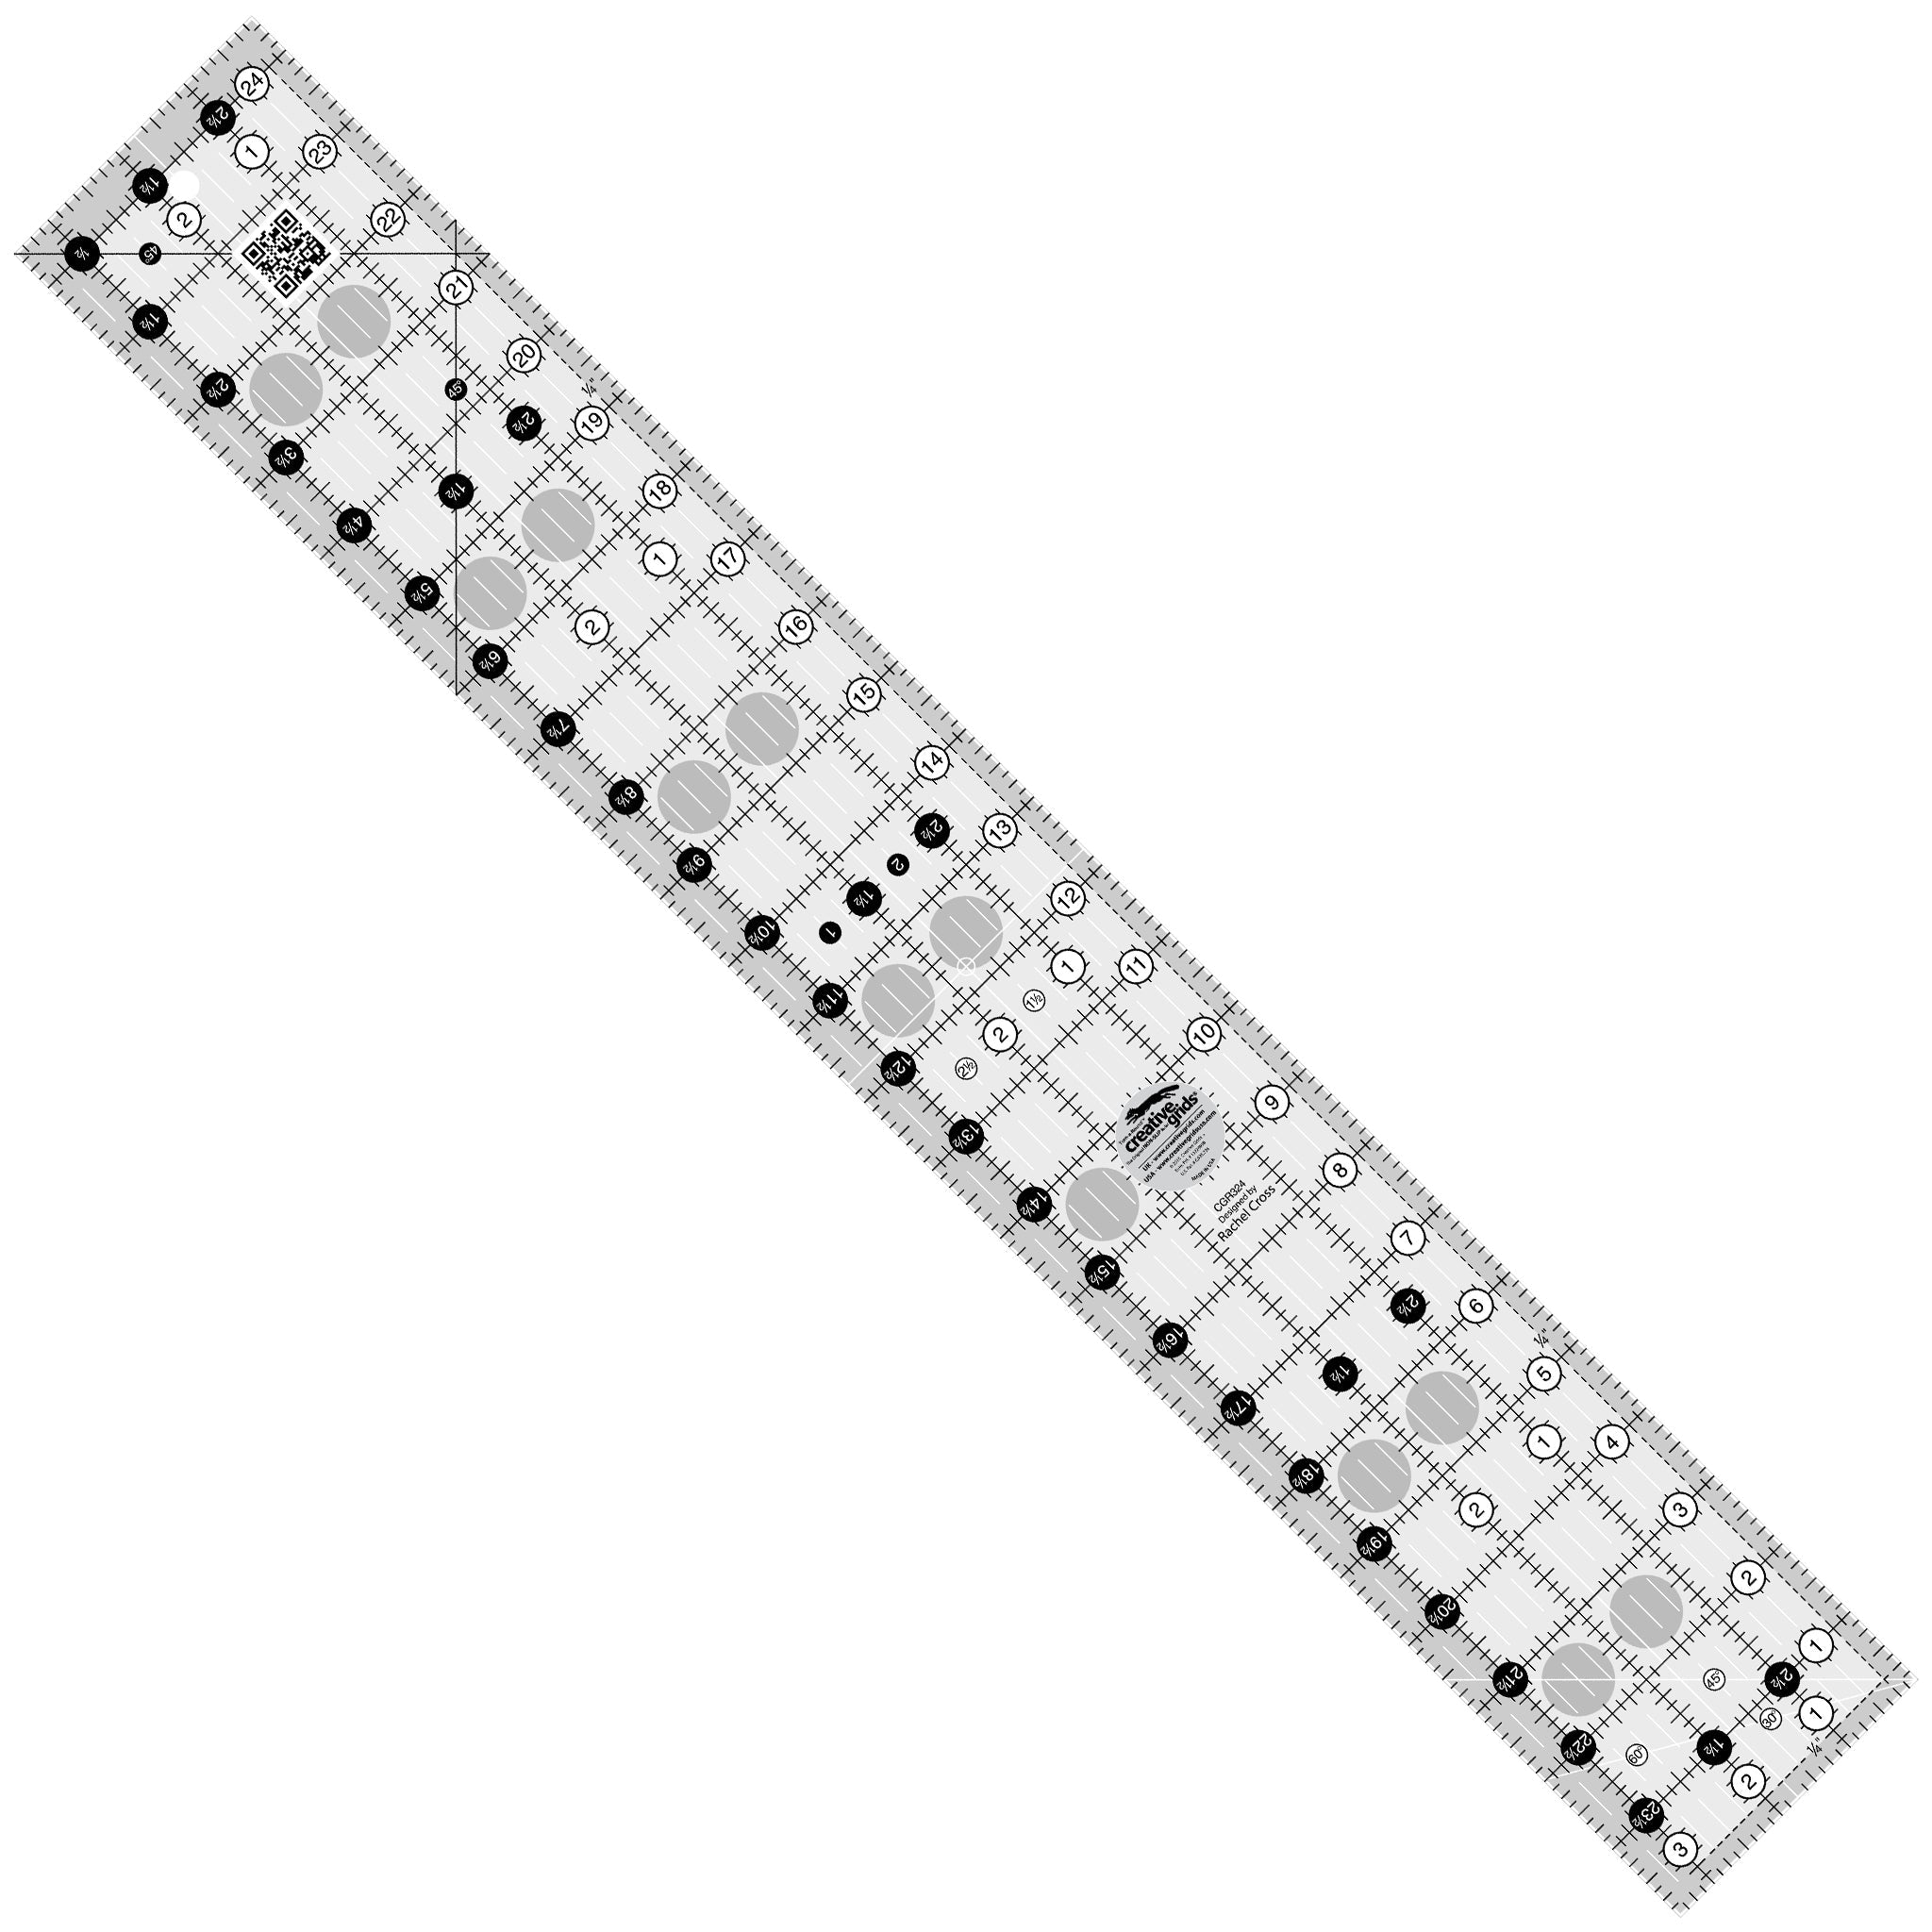 Creative Grids 3-1/2-Inch X 24-1/2-Inch Quilt Ruler (CGR324)